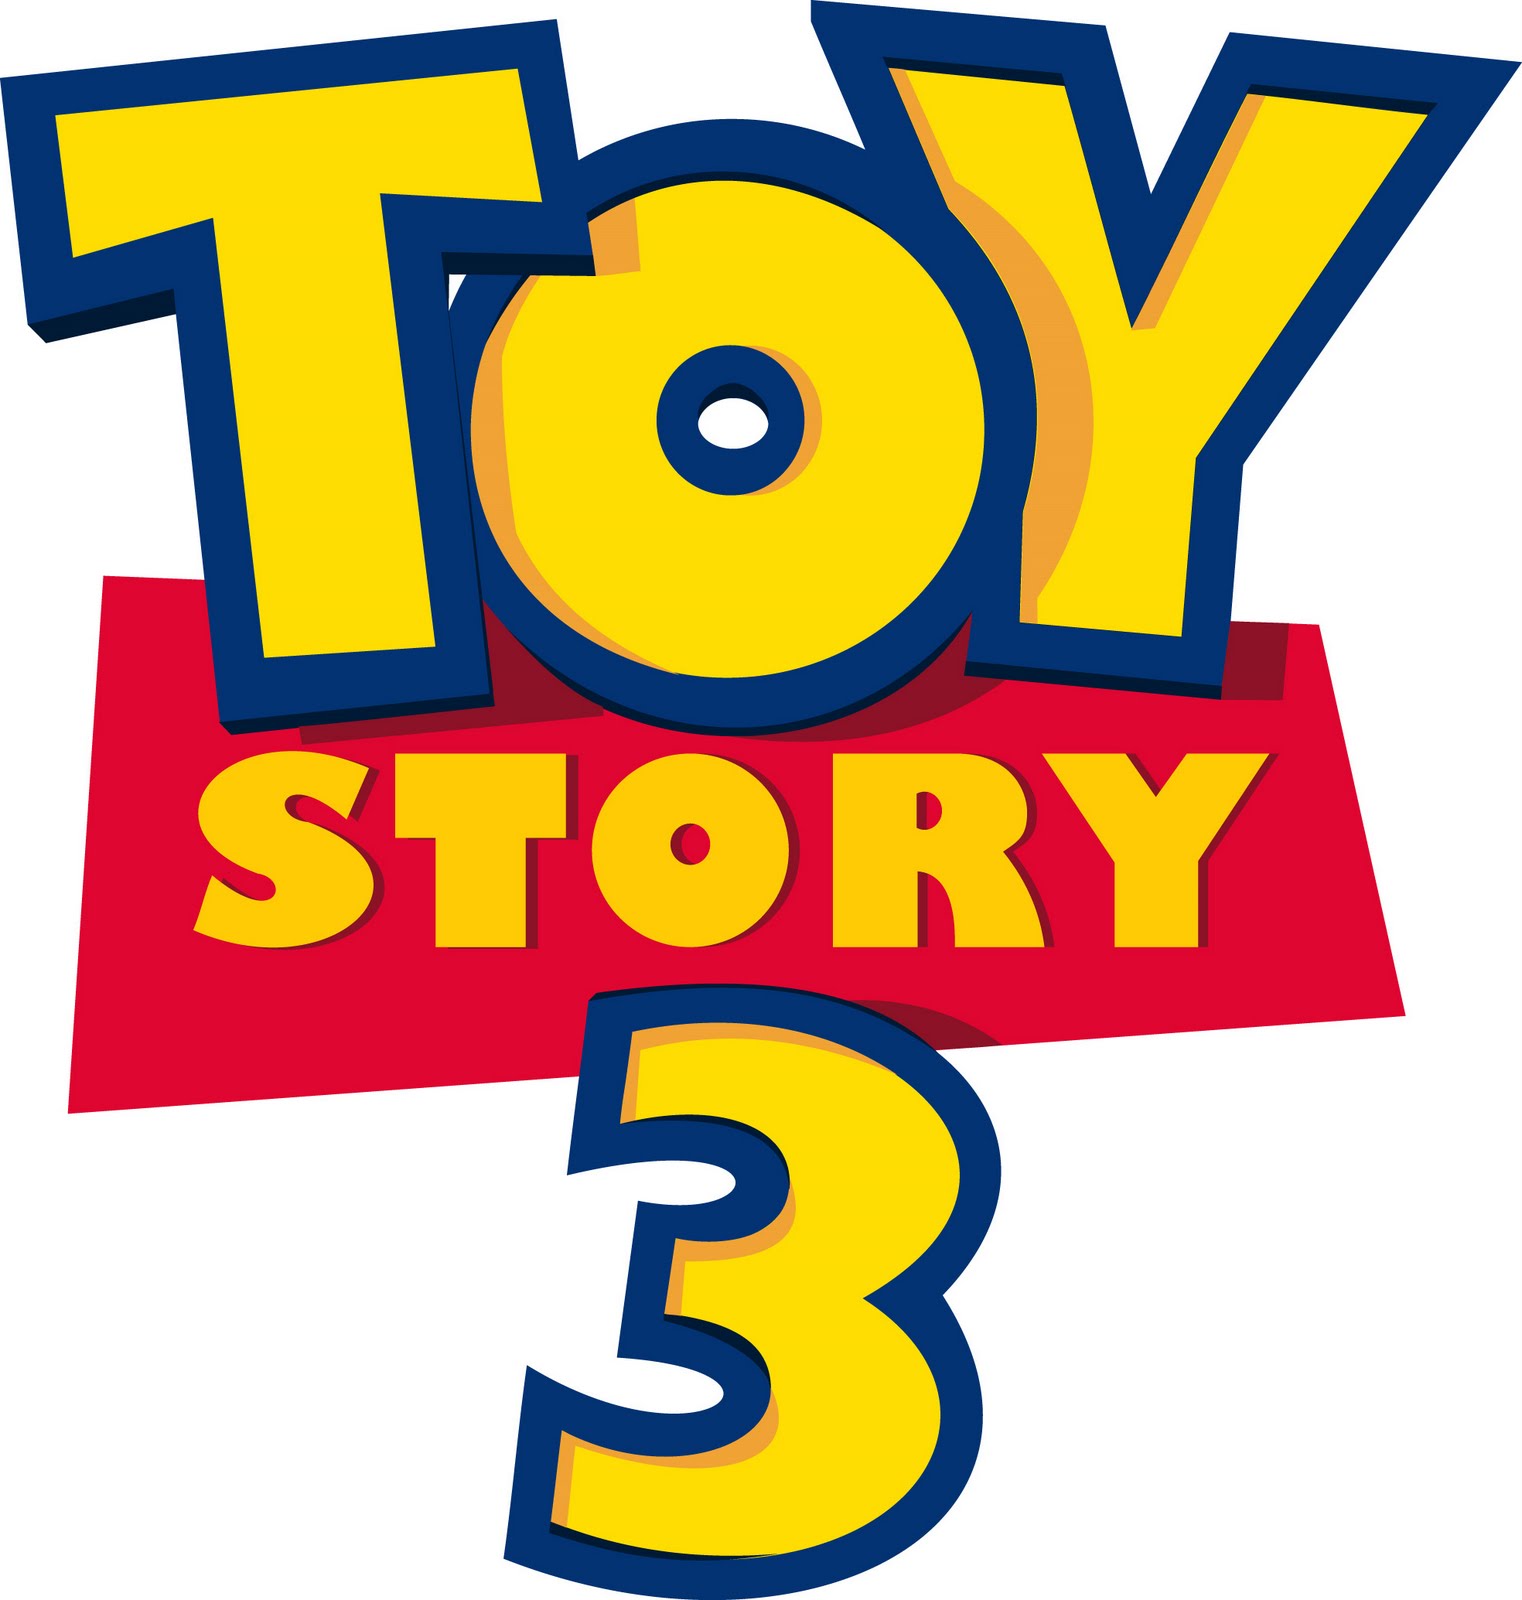 Toy story 3 logos - facelopers